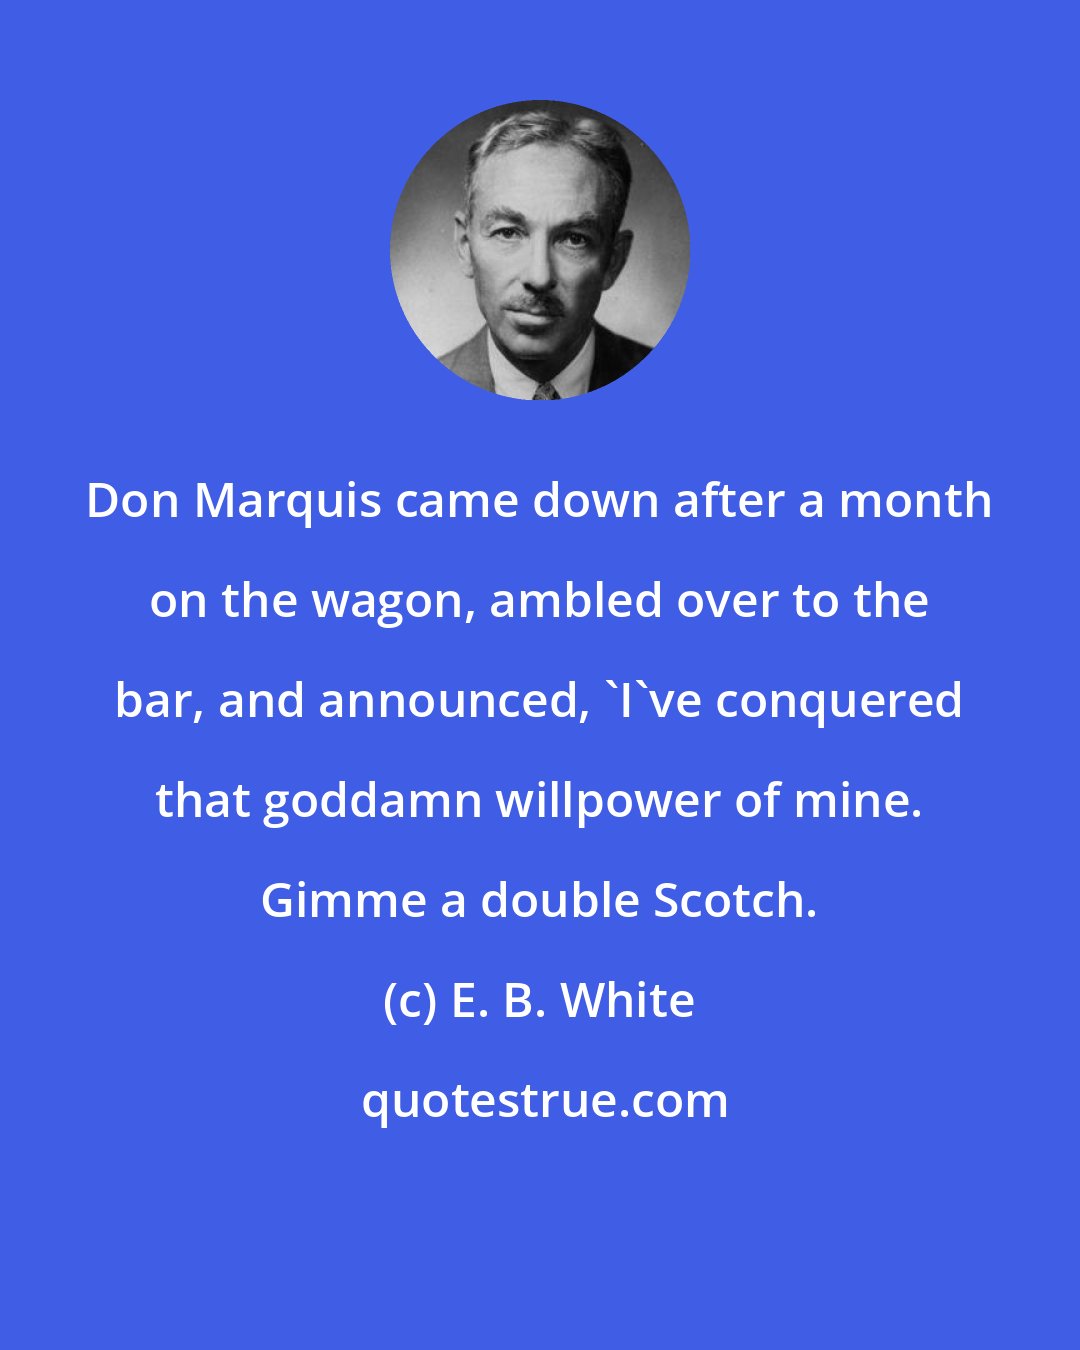 E. B. White: Don Marquis came down after a month on the wagon, ambled over to the bar, and announced, 'I've conquered that goddamn willpower of mine. Gimme a double Scotch.